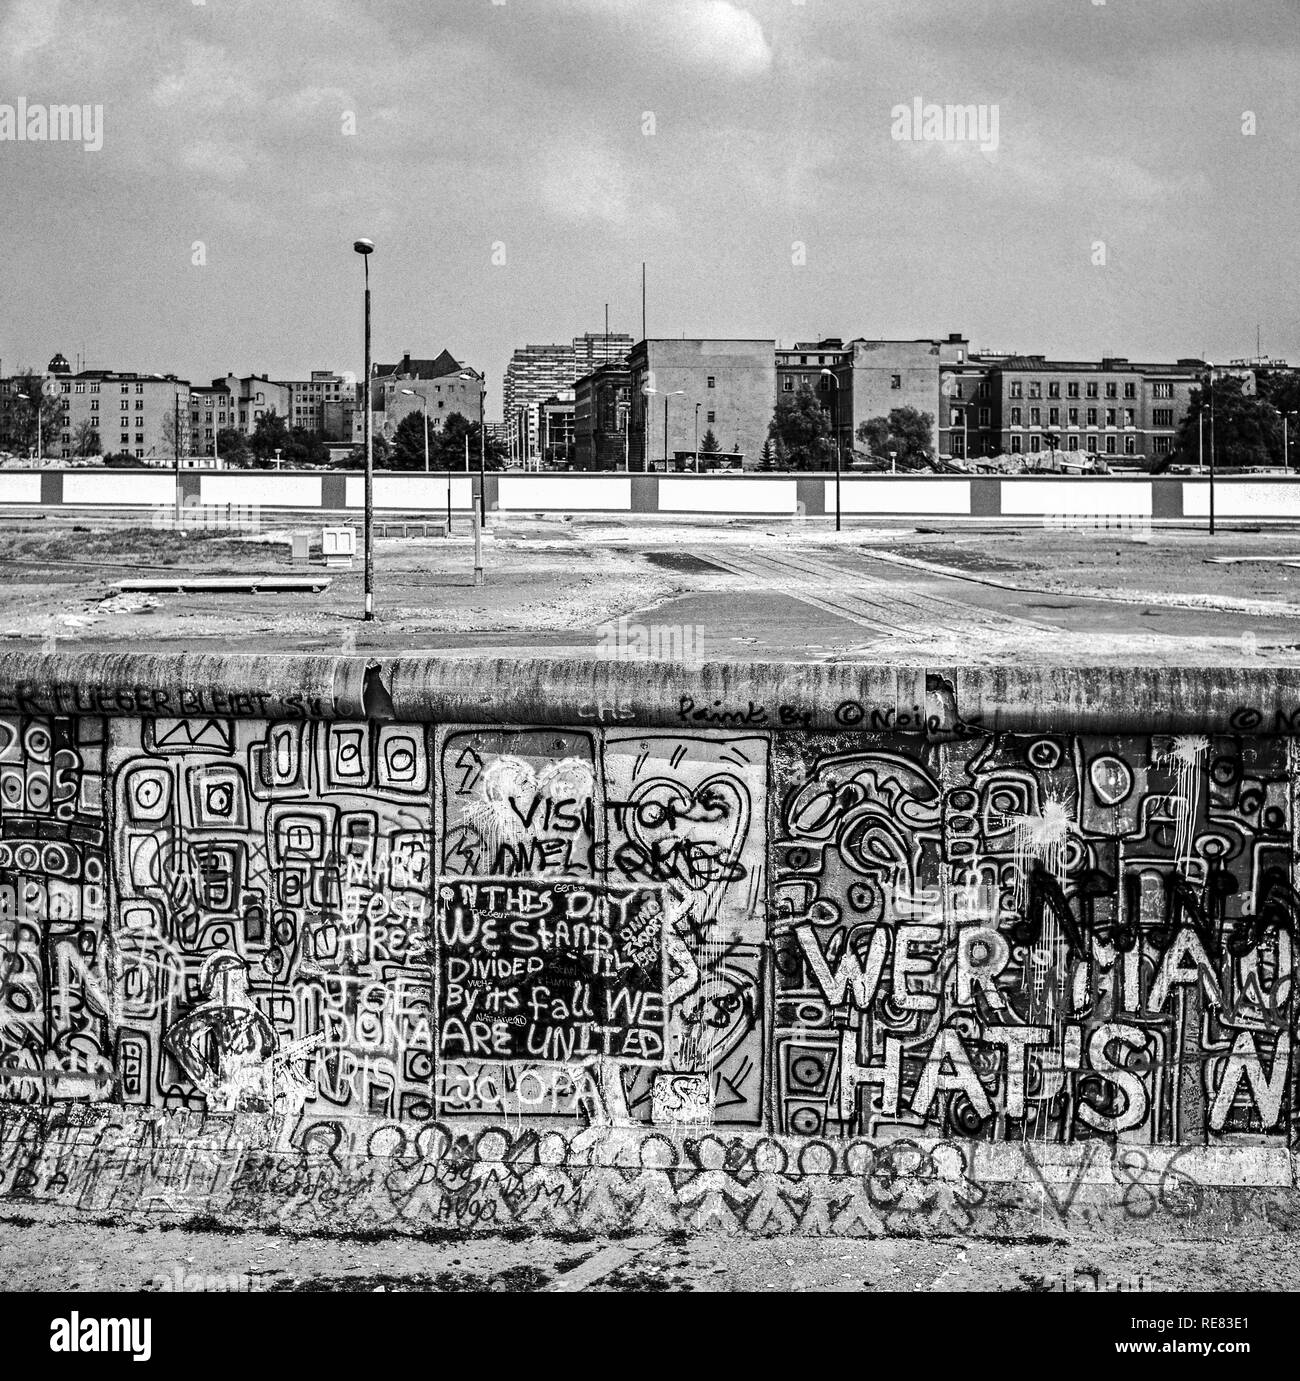 August 1986, Berlin wall graffitis at Potsdamer Platz square with view over Leipziger Platz square, death strip, West Berlin, Germany, Europe, Stock Photo